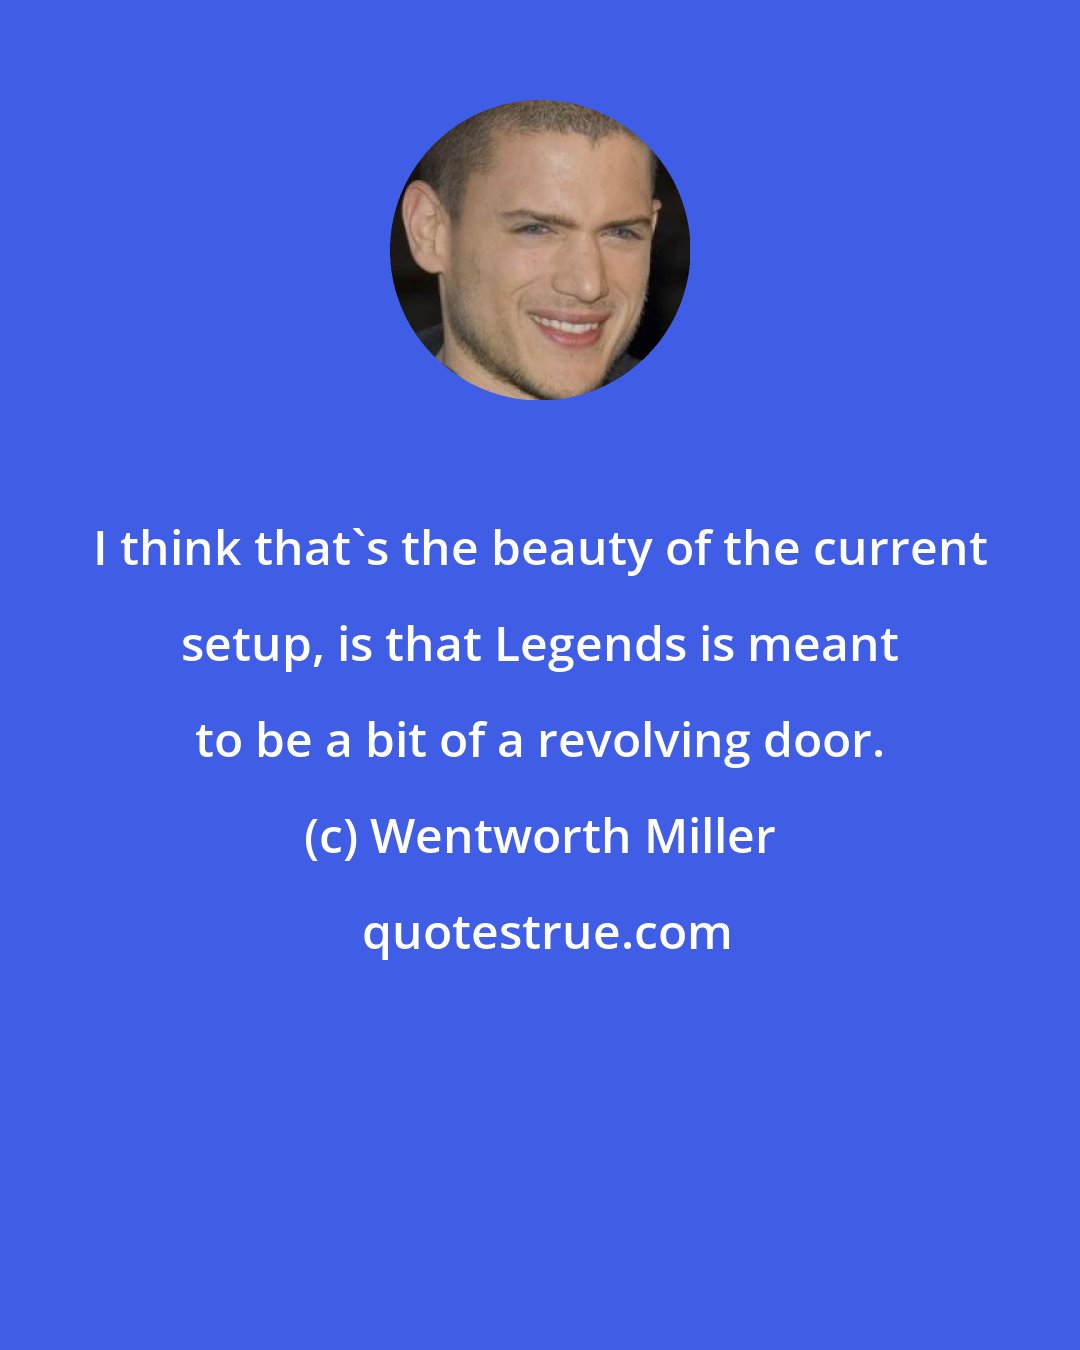 Wentworth Miller: I think that's the beauty of the current setup, is that Legends is meant to be a bit of a revolving door.